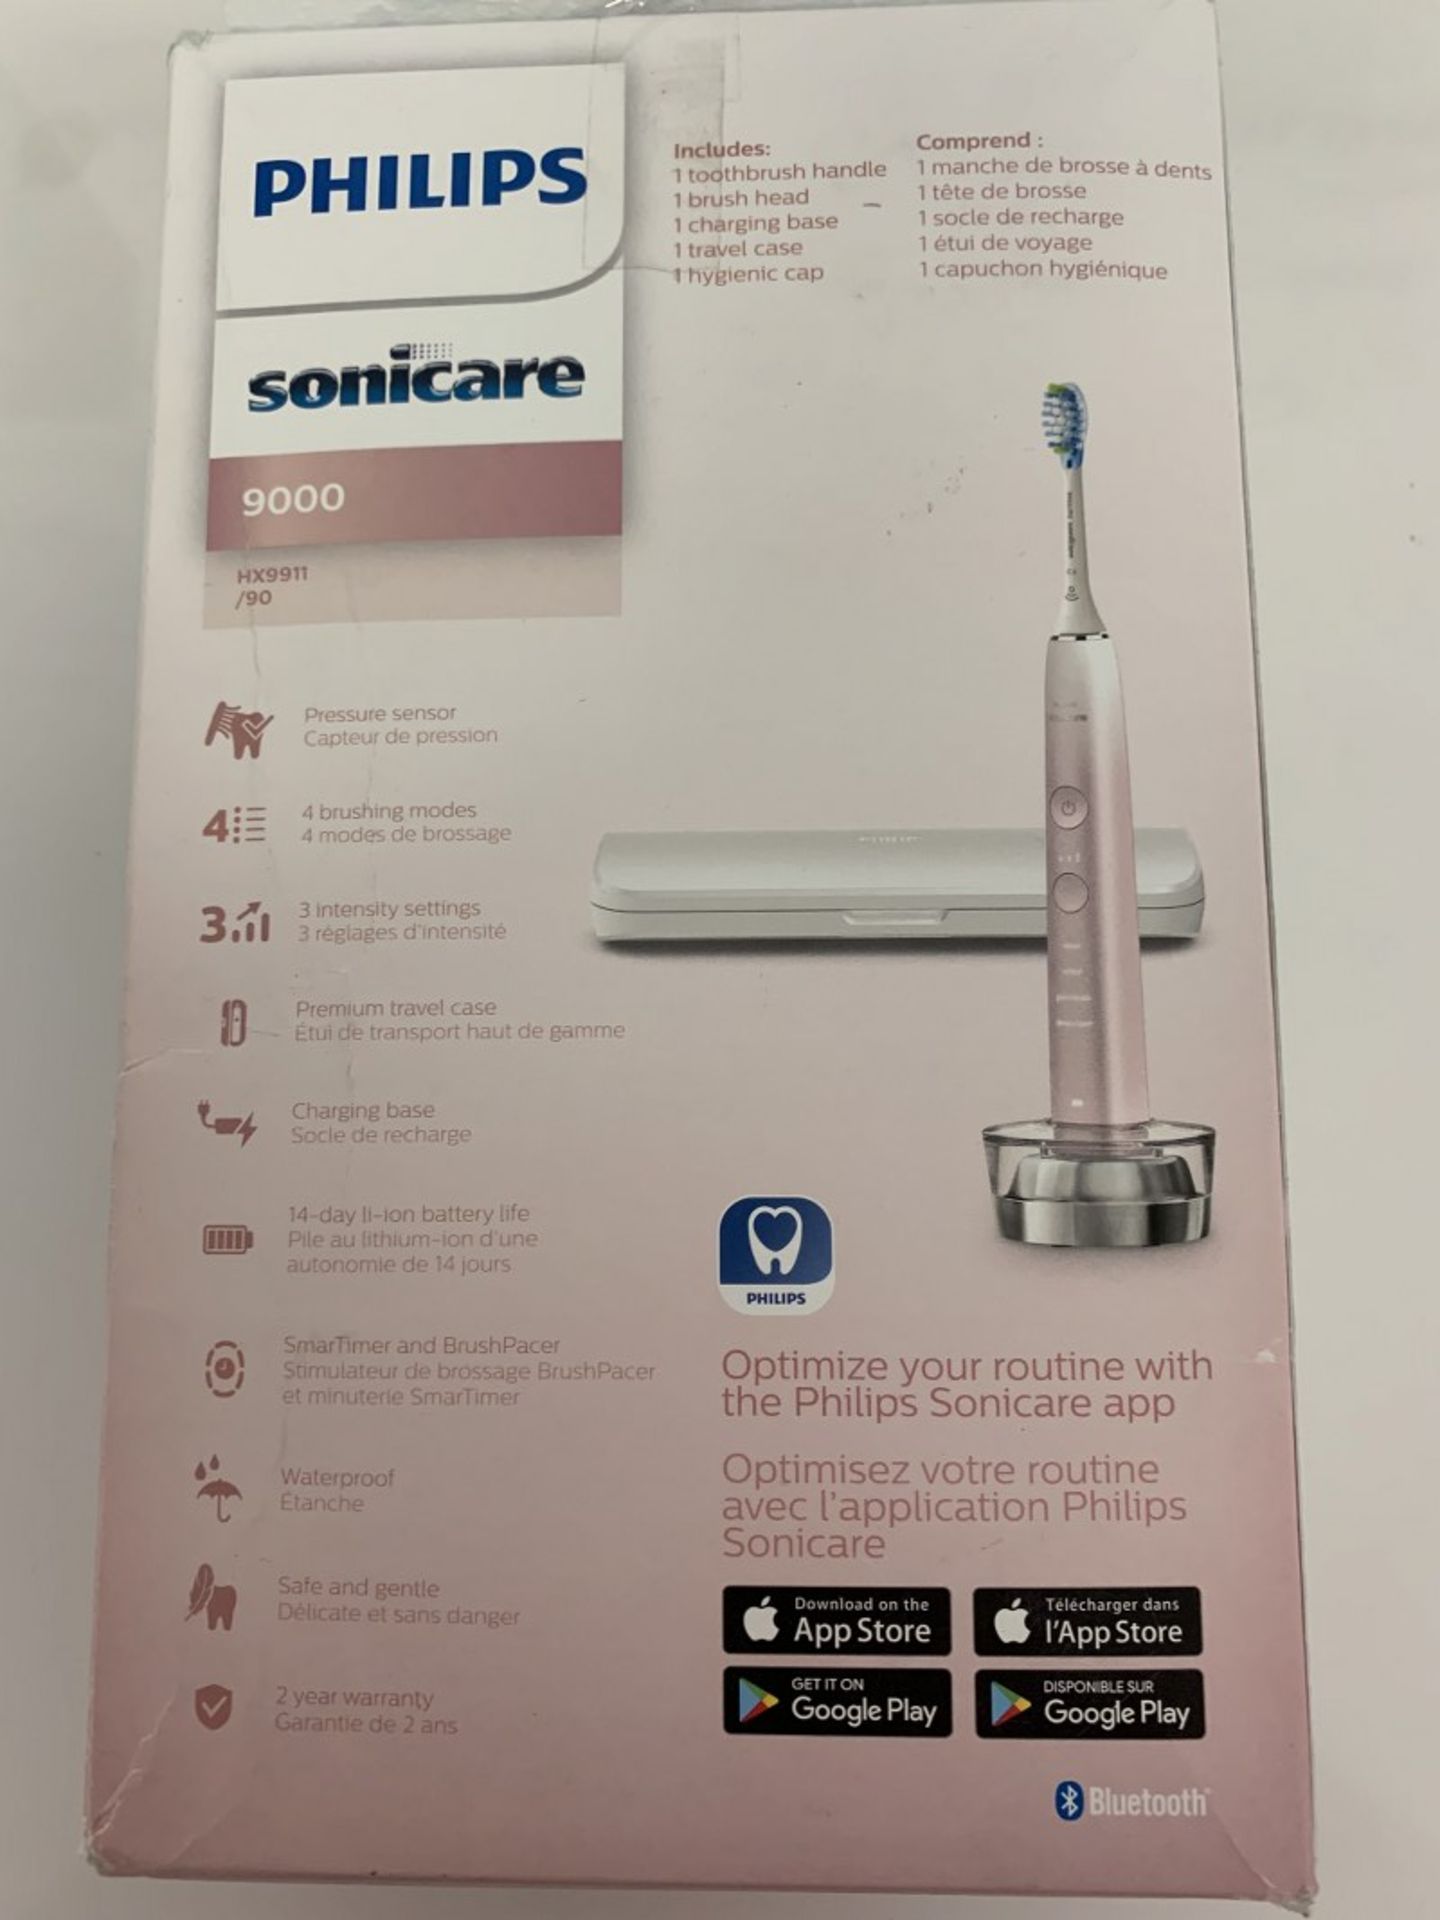 Philips - Sonicare 9000 - Power Toothbrush - Image 2 of 2